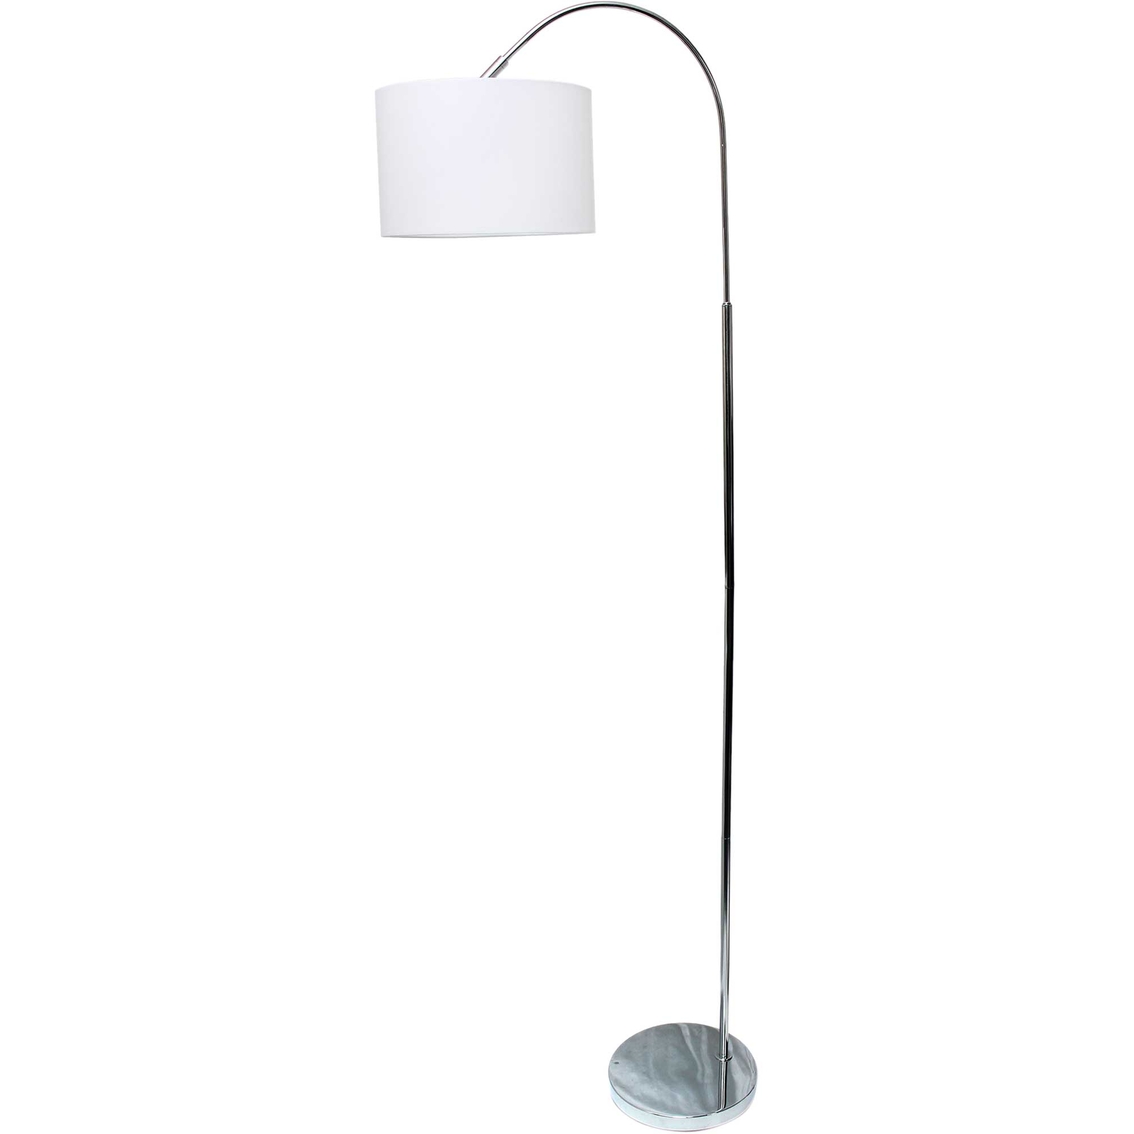 Simple Designs Arched Brushed Nickel 65 in. Floor Lamp with Fabric Shade